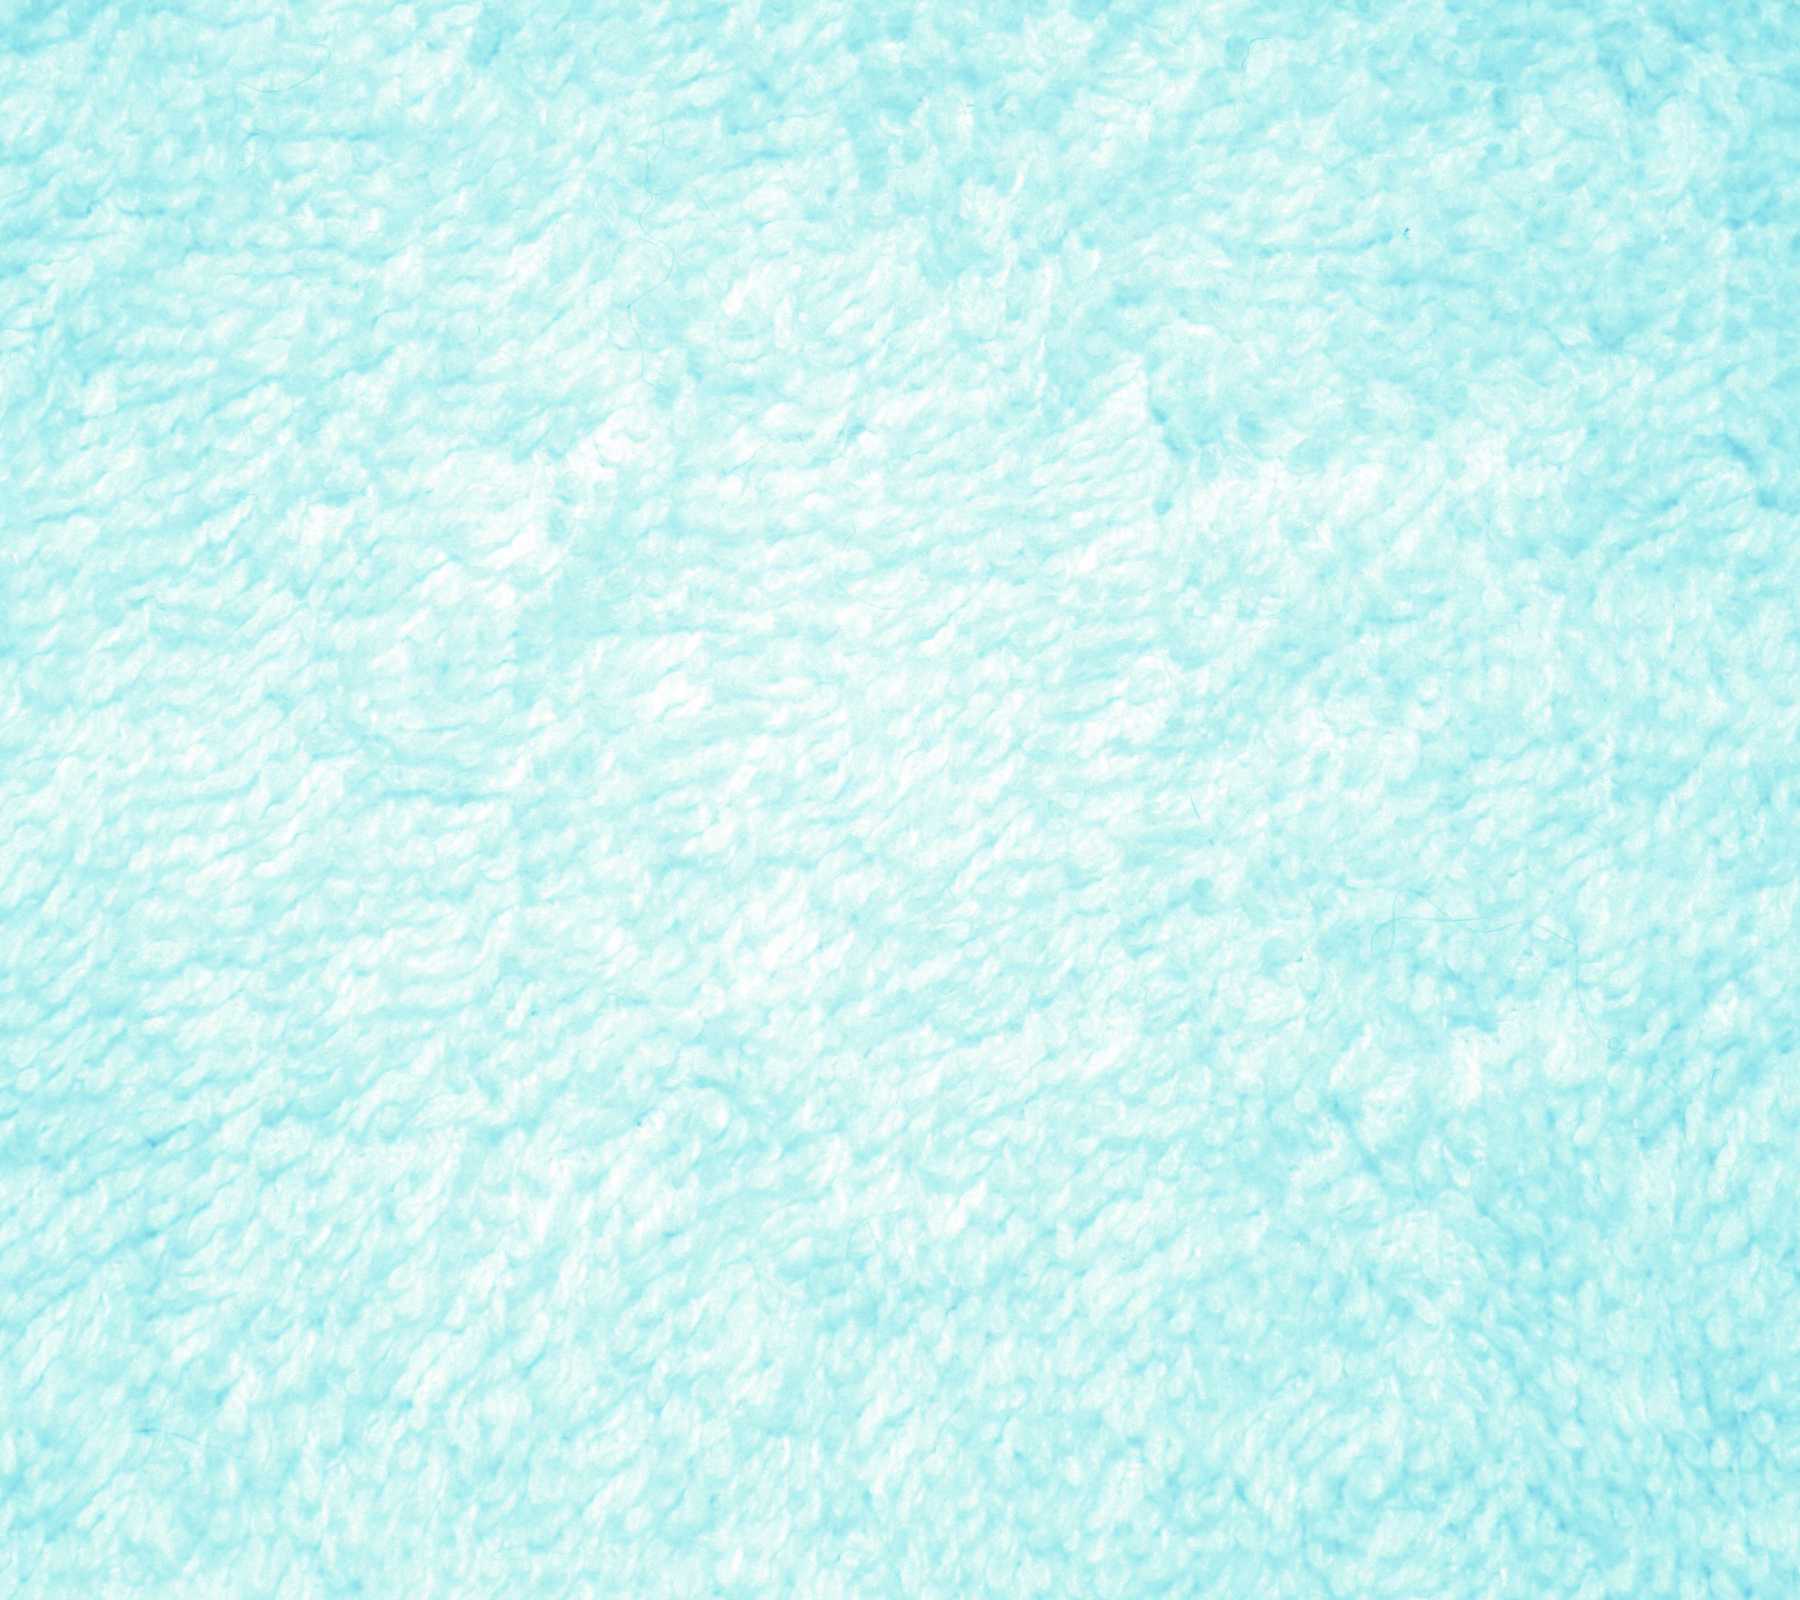 Teal Terry Cloth Towel Background Background